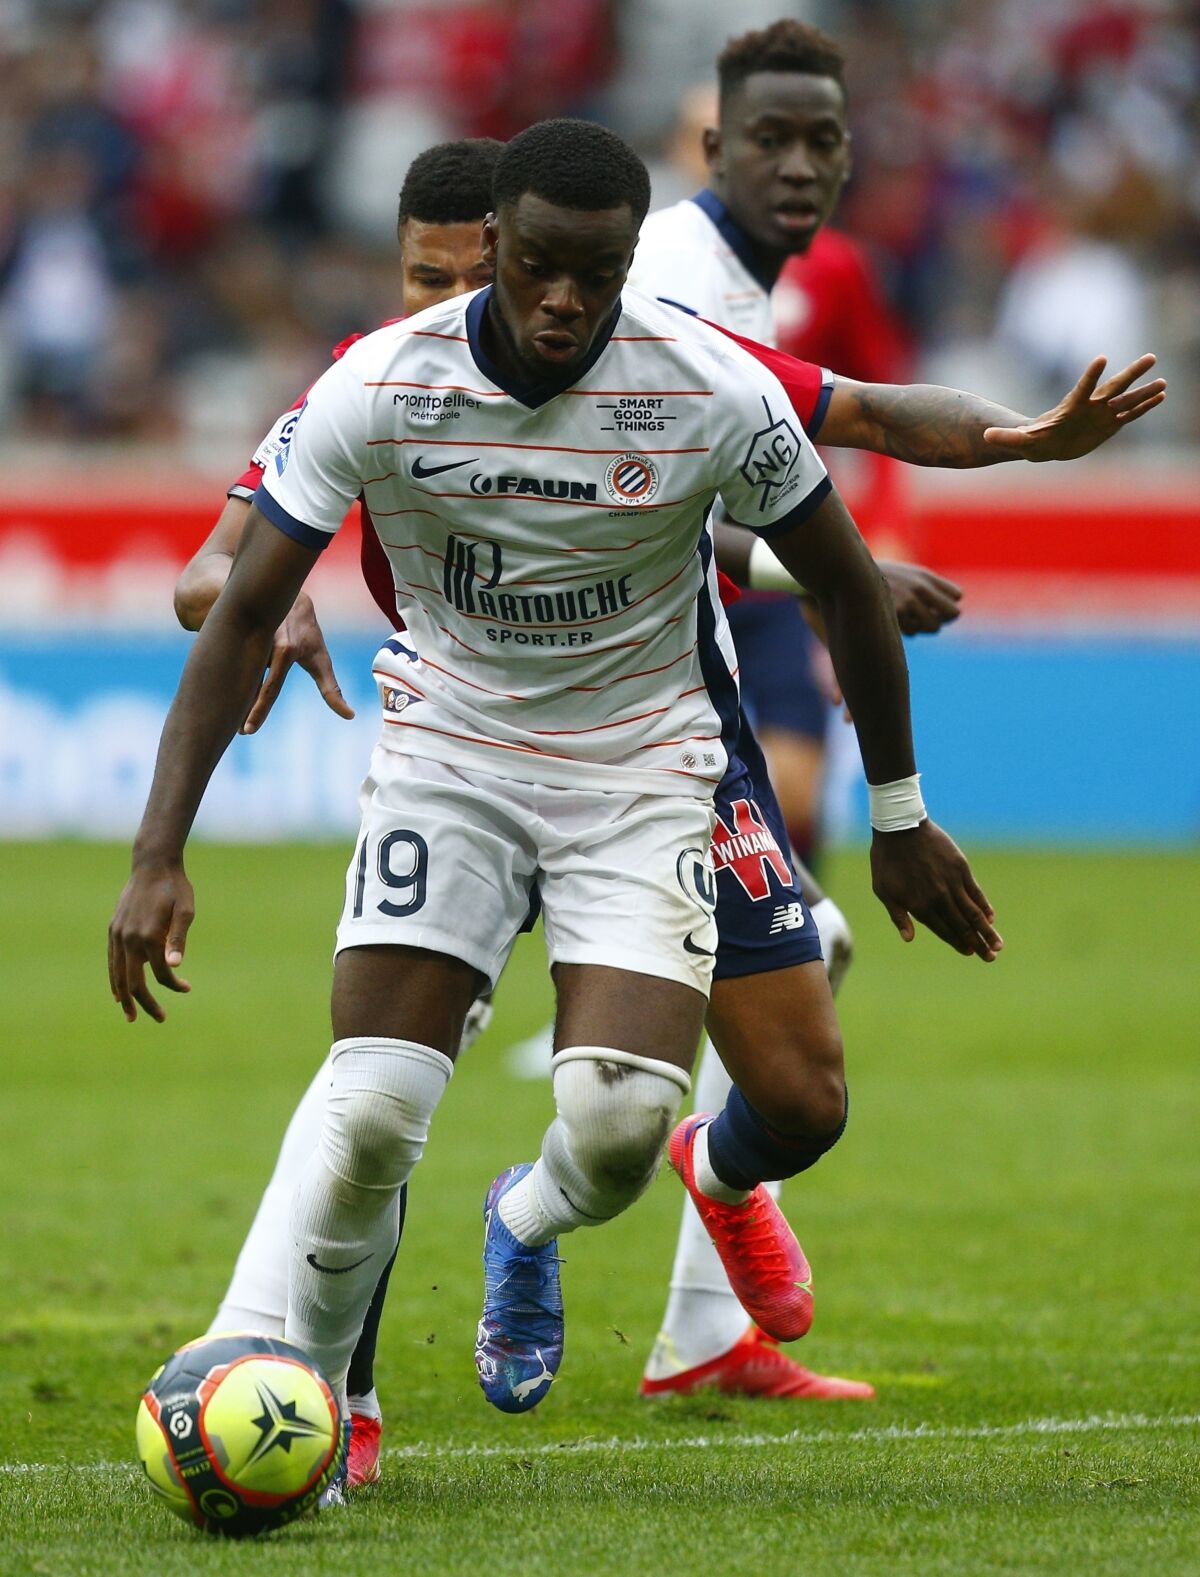 FILE - Montpellier's Stephy Mavididi controls the ball during the French League One soccer match between Lille and Montpellier at the Stade Pierre Mauroy stadium in Villeneuve-d'Ascq, France, on Aug. 29, 2021. It has been a long wait for Stephy Mavidi and Montpellier. But after more than a year without finding the net, the English striker scored a double over the weekend, hitting form again at the right time just before leader PSG's visit midweek. (AP Photo/Michel Spingler, File)